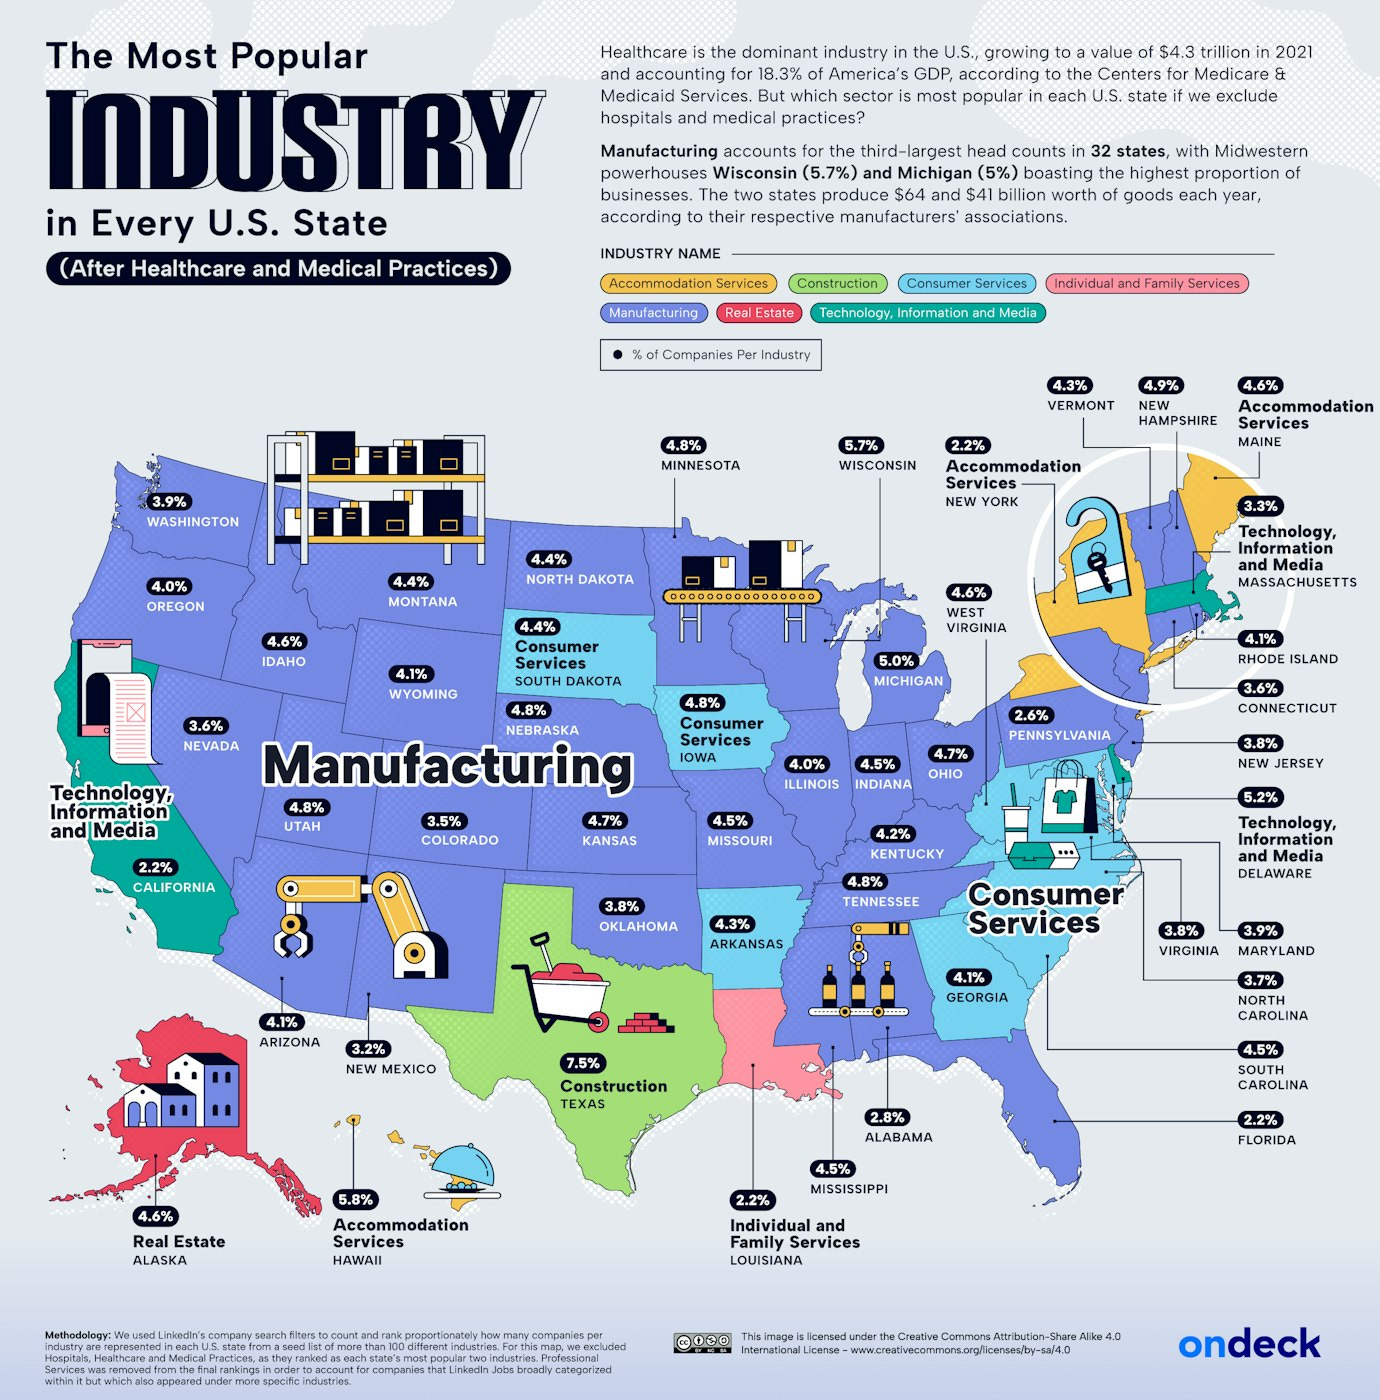 Map of the most popular business industries in the United States